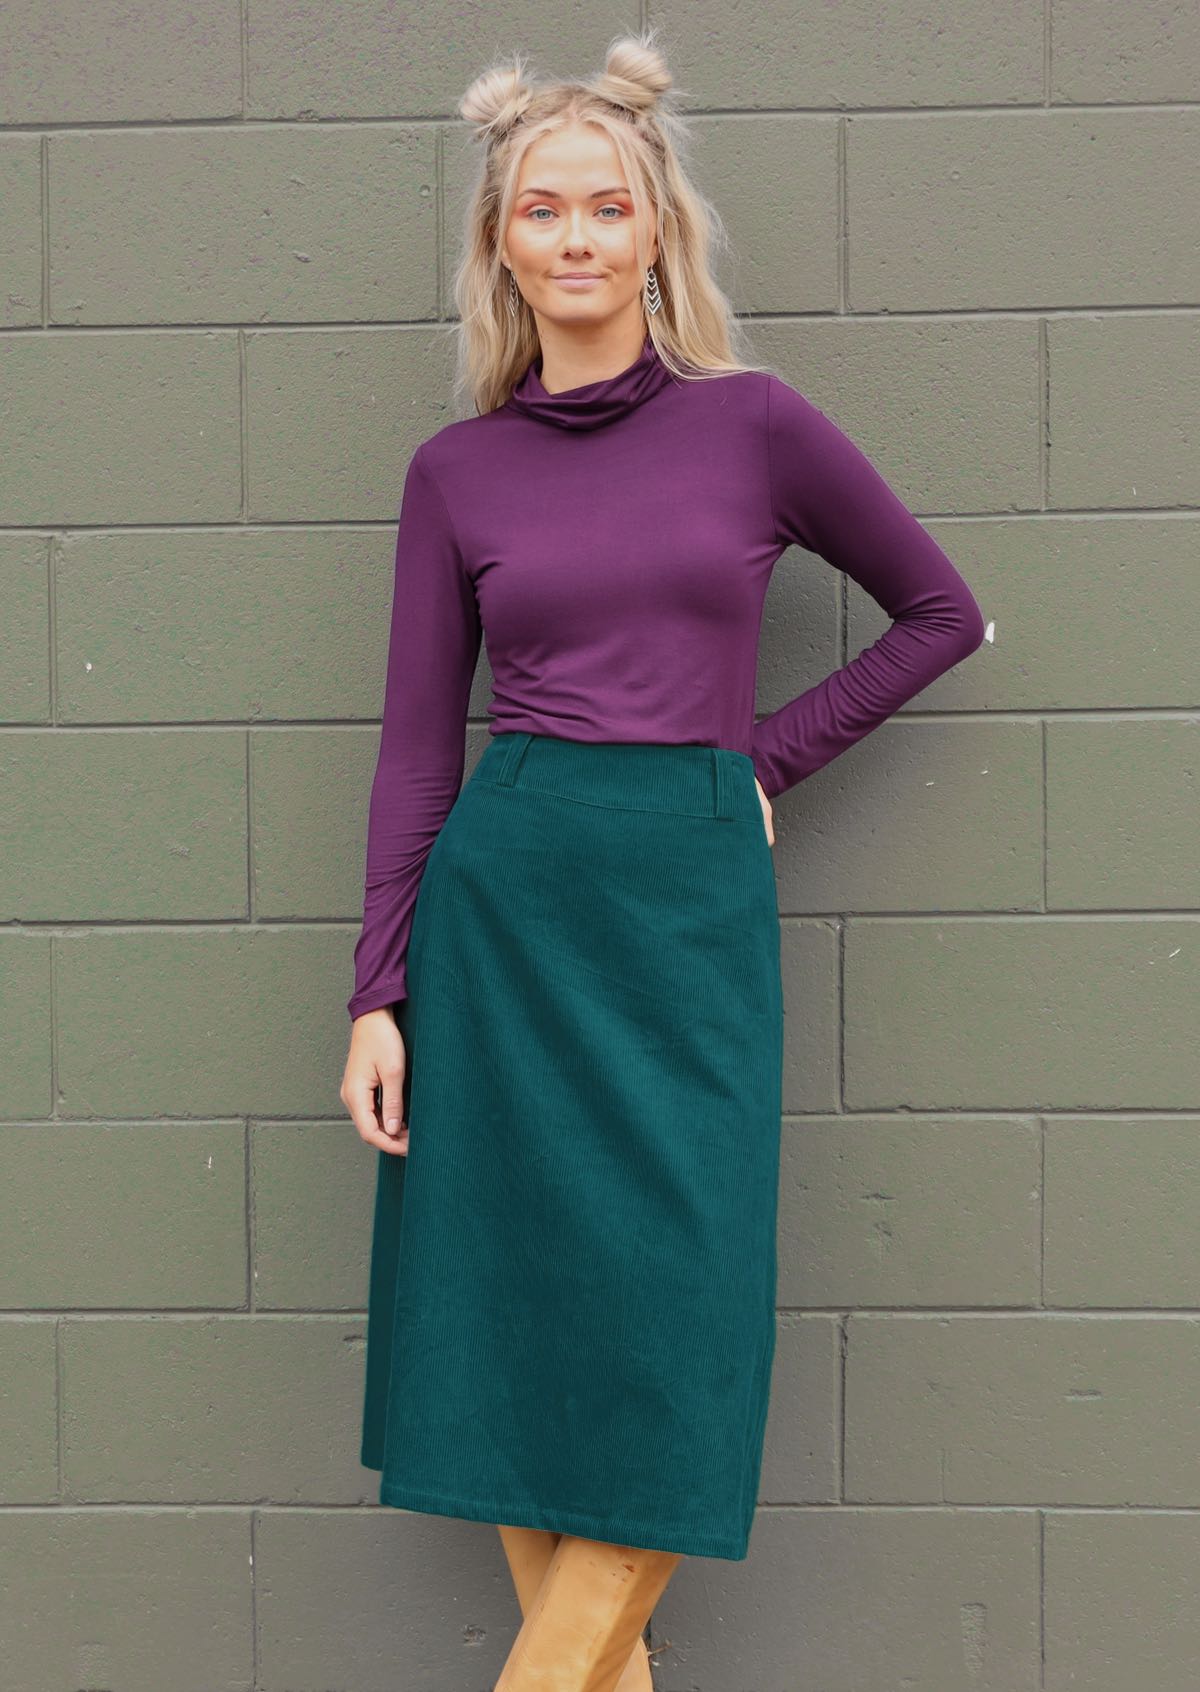 Corduroy skirt pairs perfectly with one of our basic tops